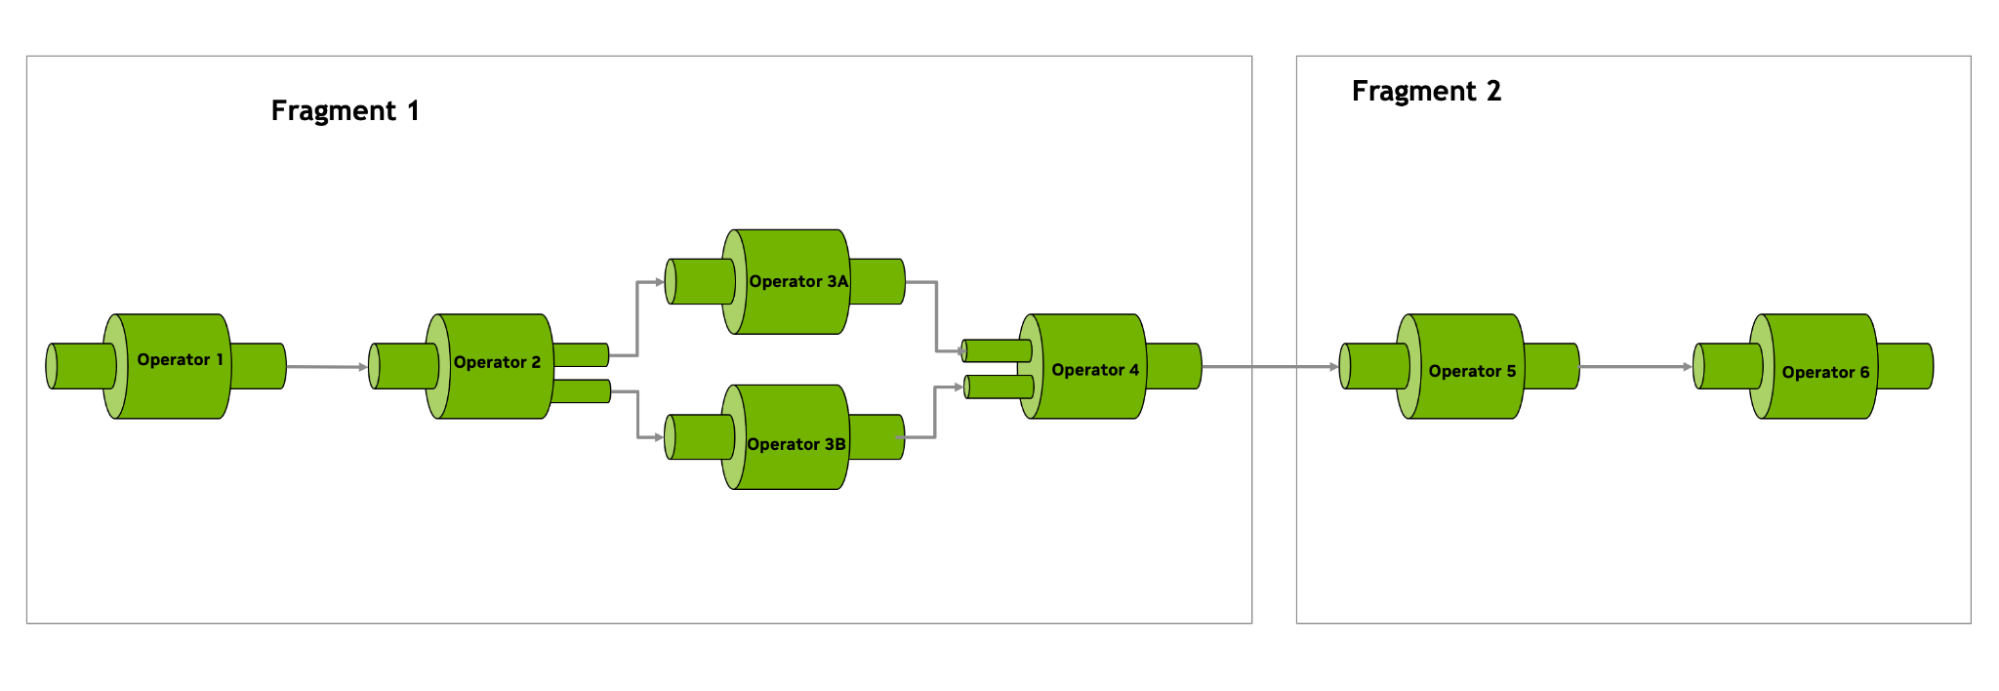 The figure shows an application made of two fragments, each composed of chained operators that are serially connected. One example shows two operators connected in parallel.
